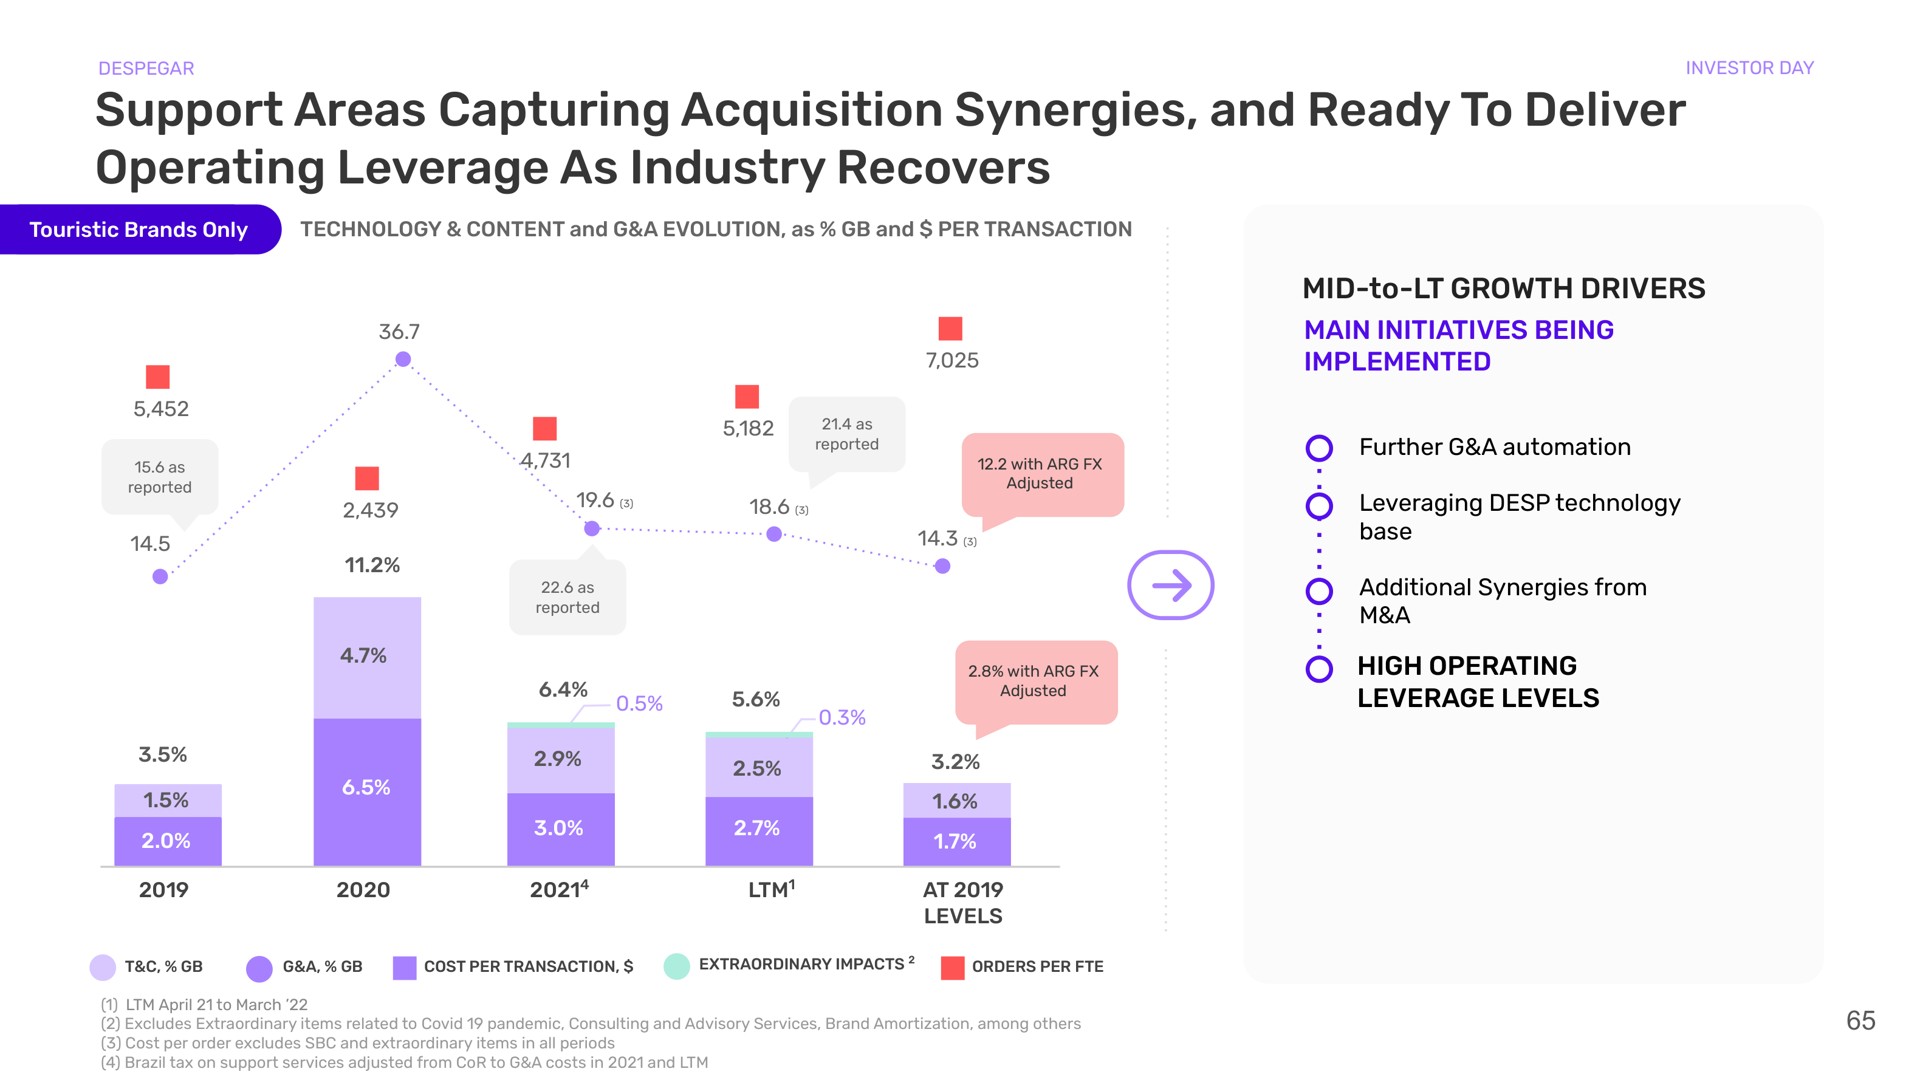 support areas capturing acquisition synergies and ready to deliver operating leverage as industry recovers mid to growth drivers main initiatives being implemented high operating leverage levels | Despegar